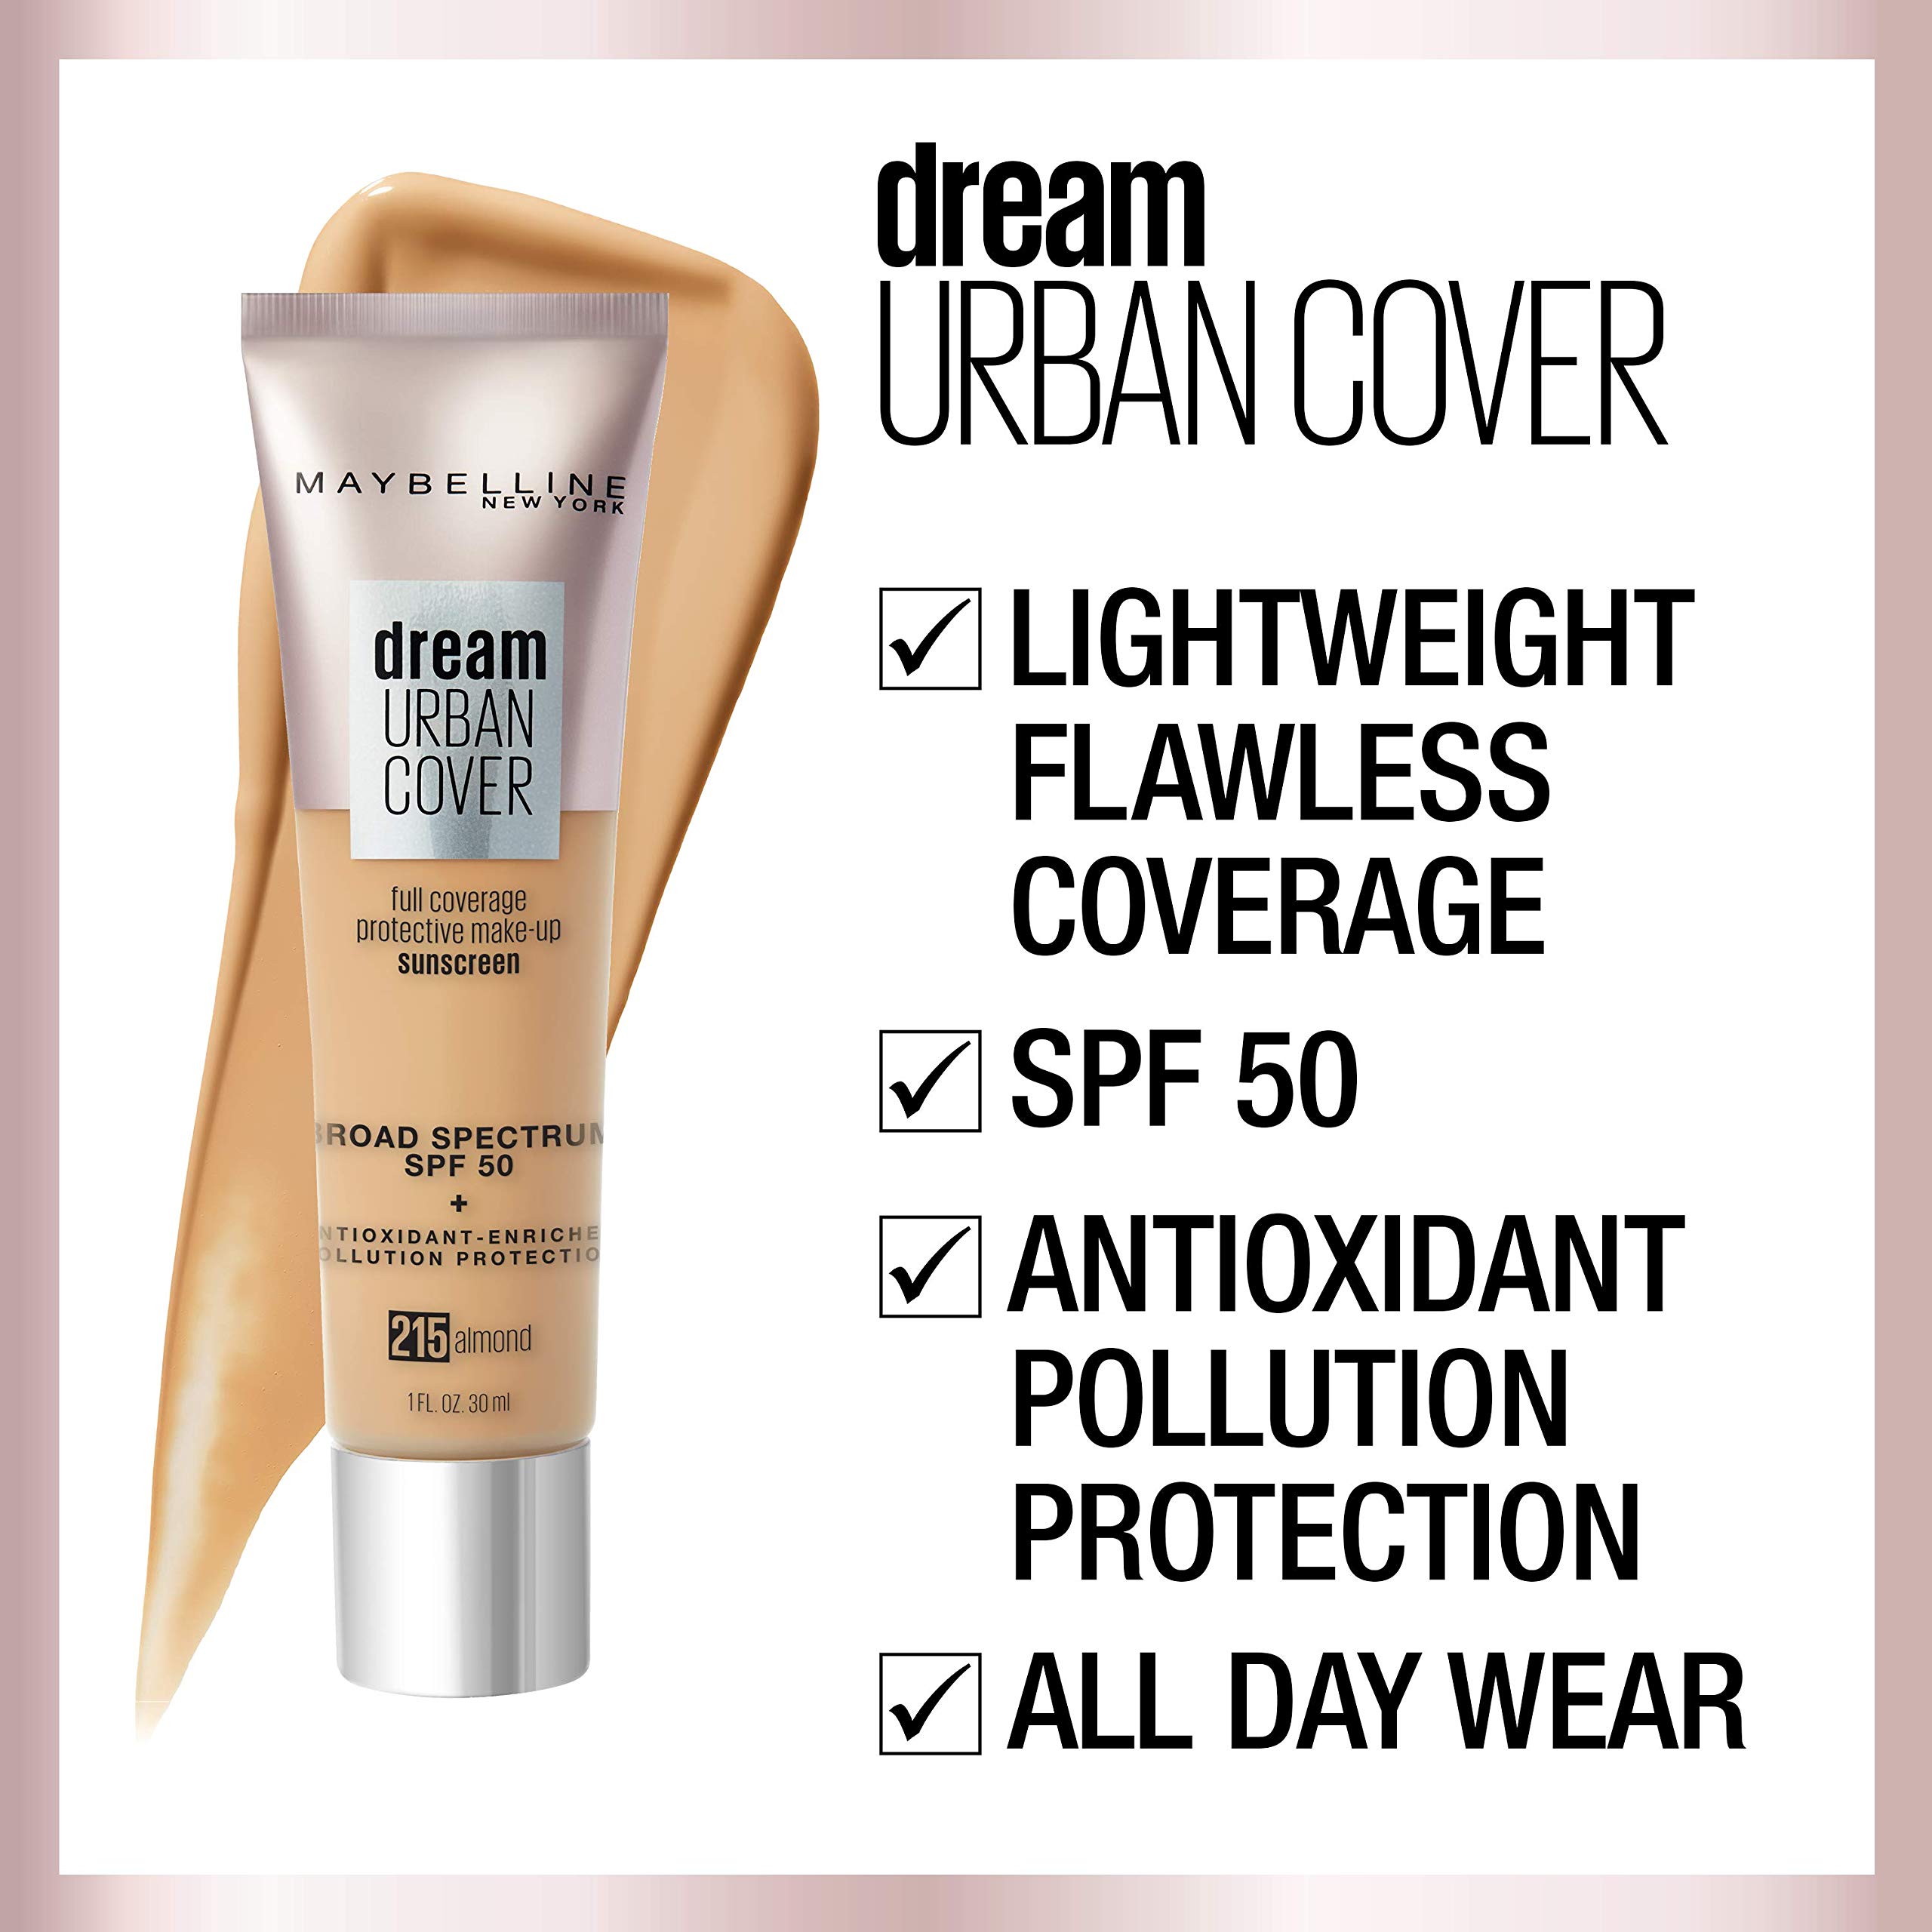 Maybelline Dream Urban Cover Flawless Coverage Foundation Makeup, SPF 50, Truffle